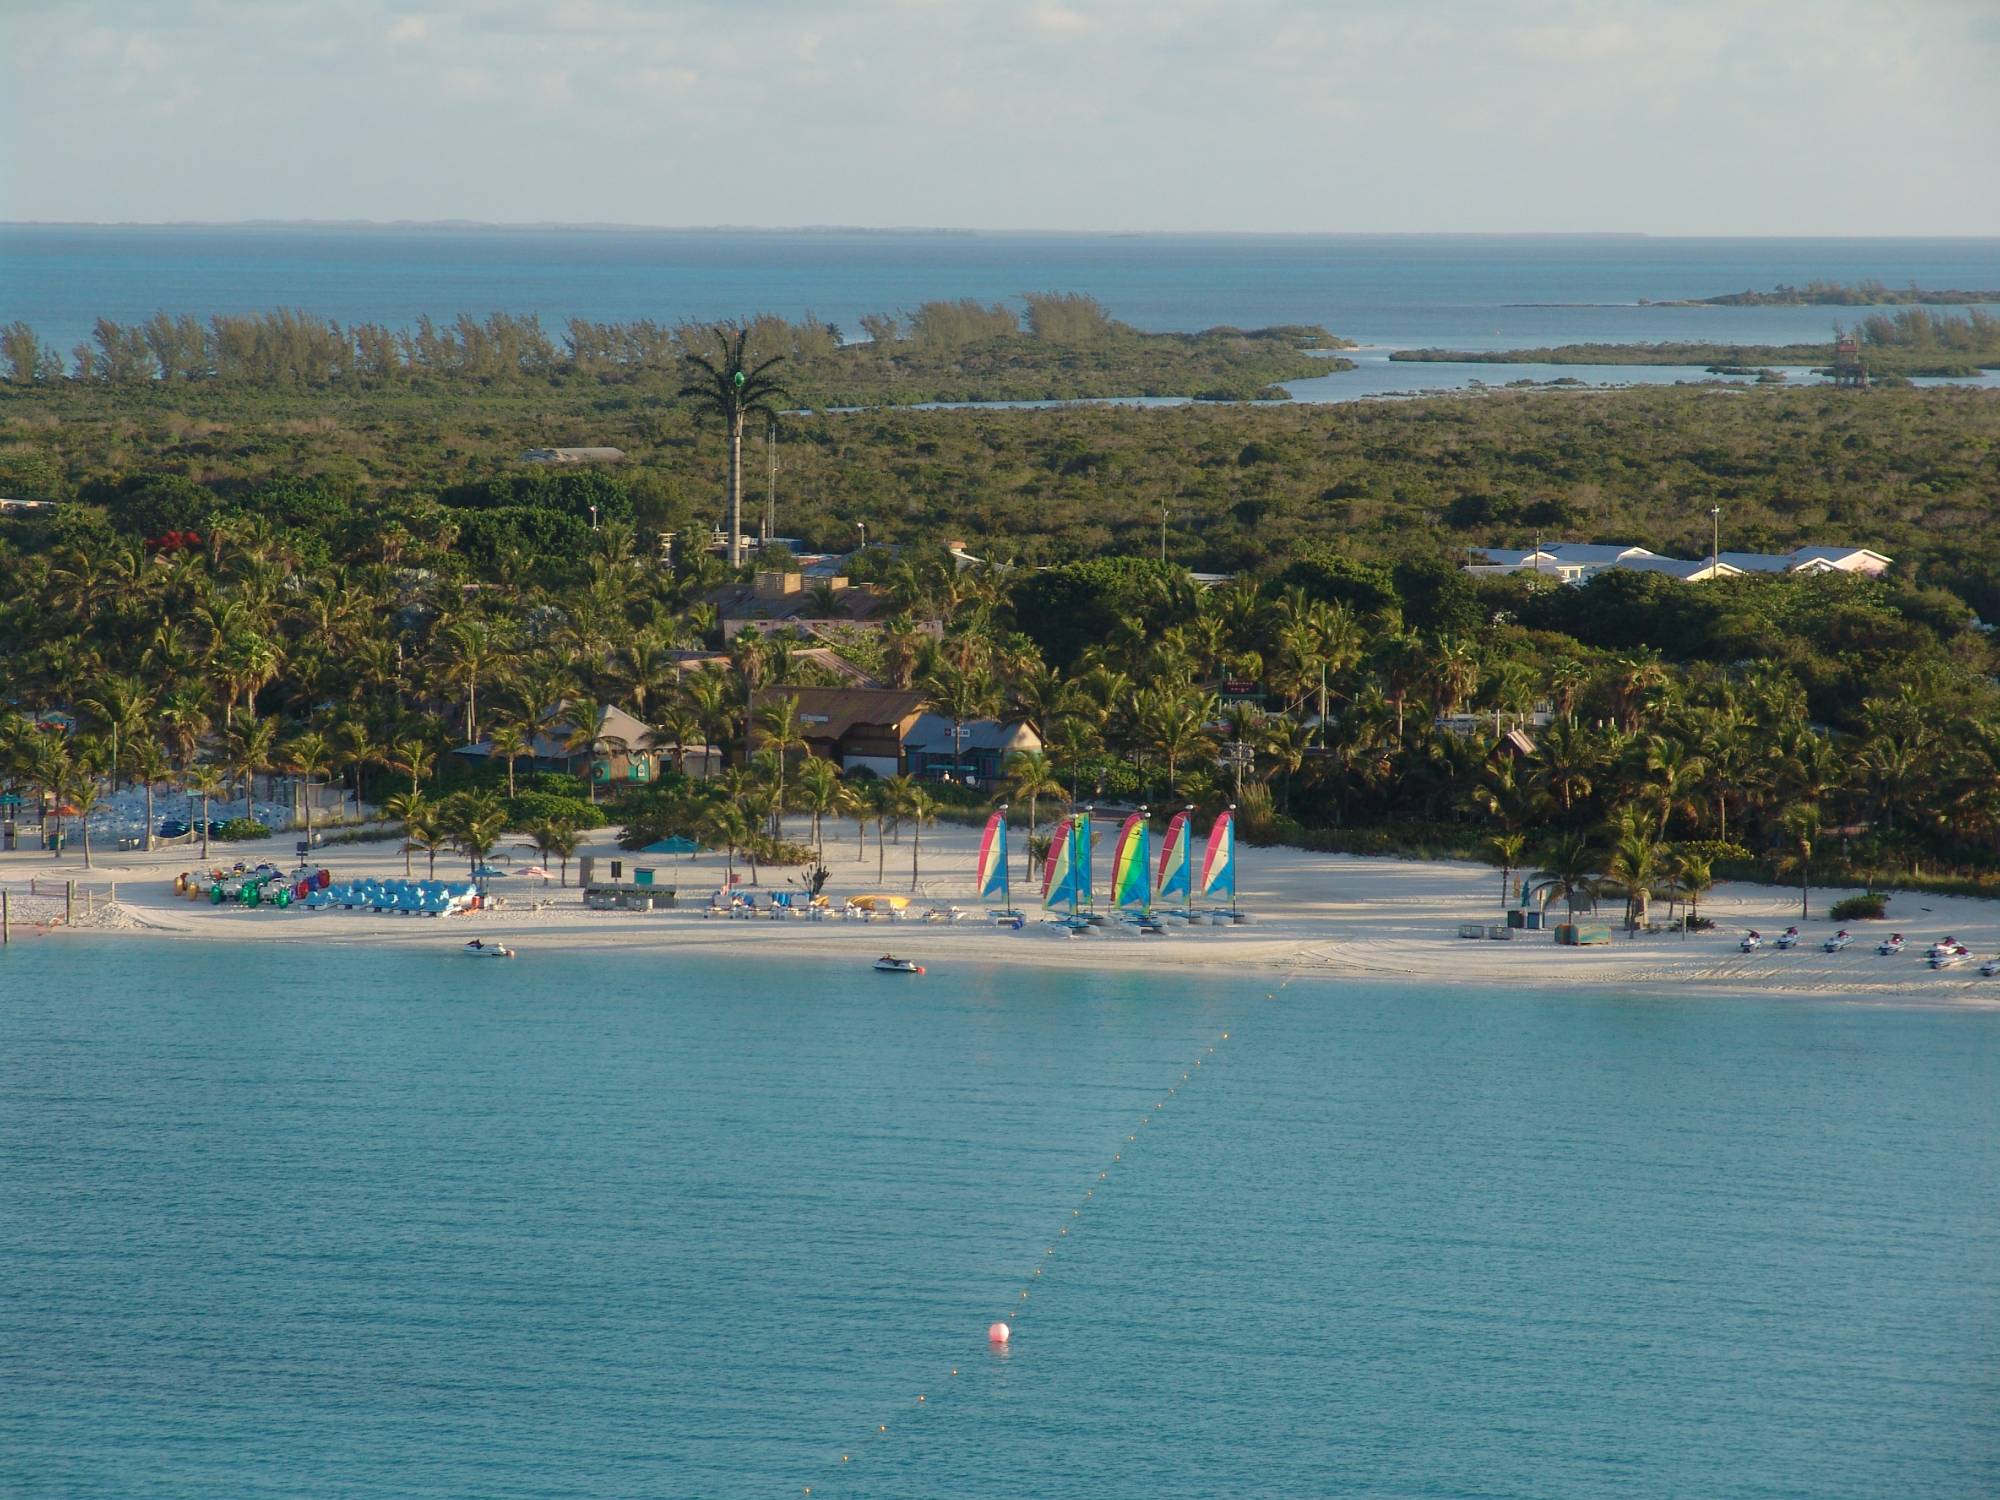 Castaway Cay - as seen from the Dream